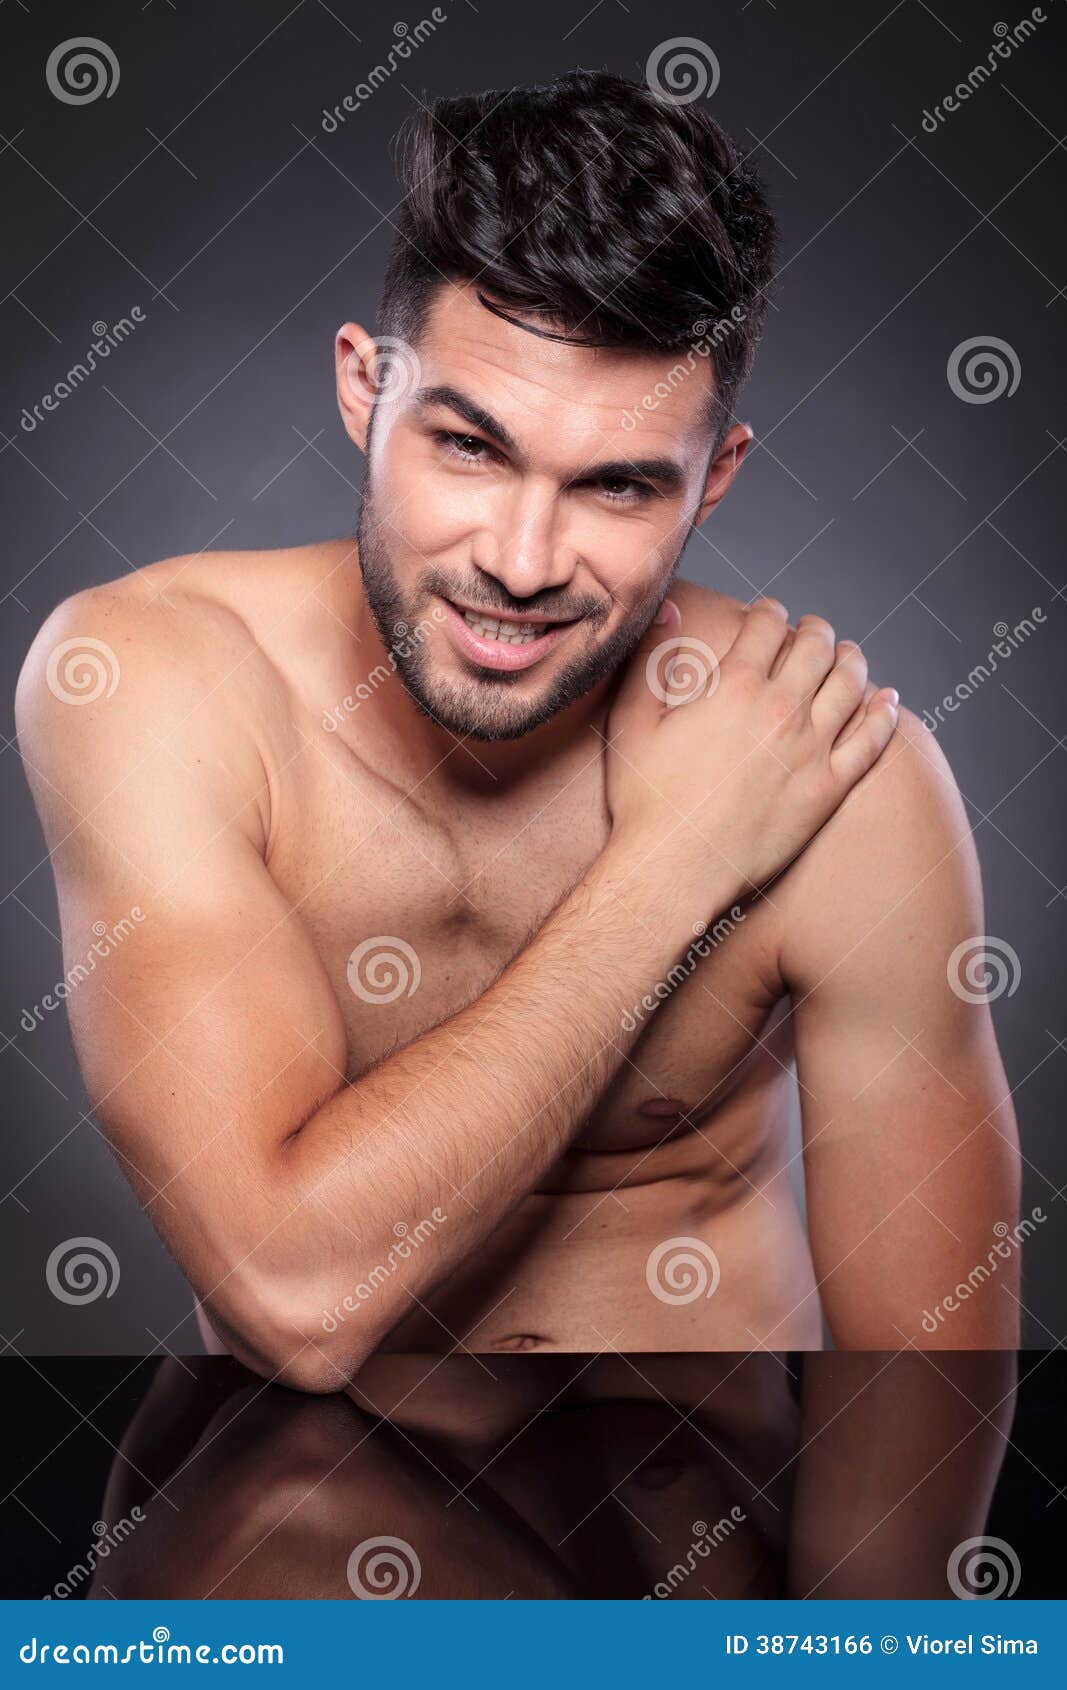 Naked Man Smiles With Hand On Shoulder Stock Photo - Image 